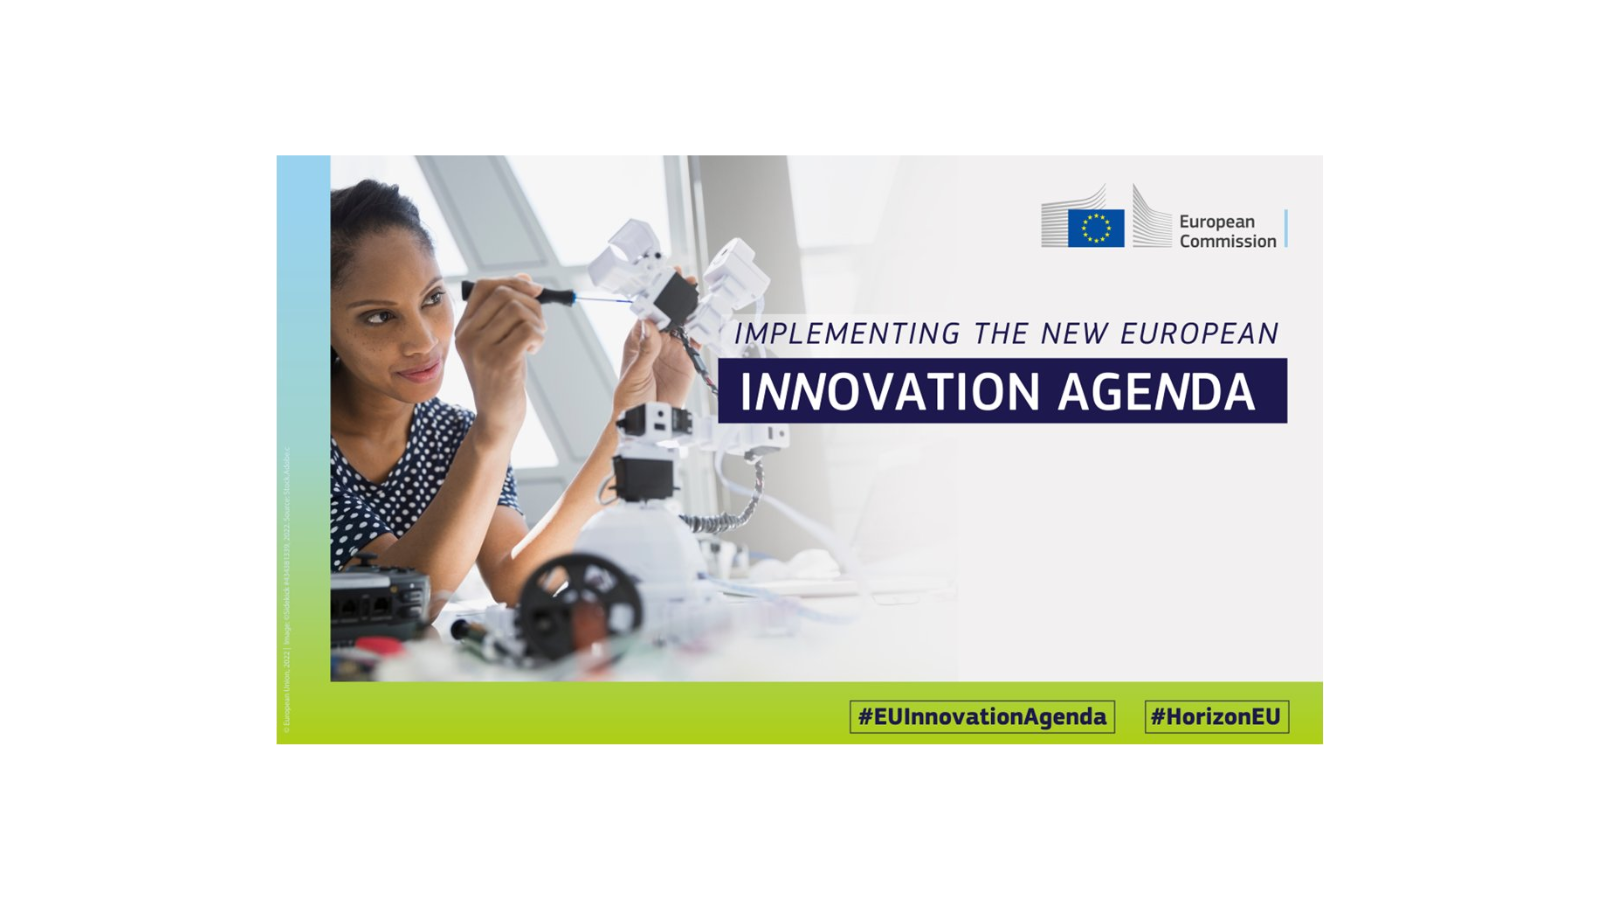 169 country actions in support of the New European Innovation Agenda